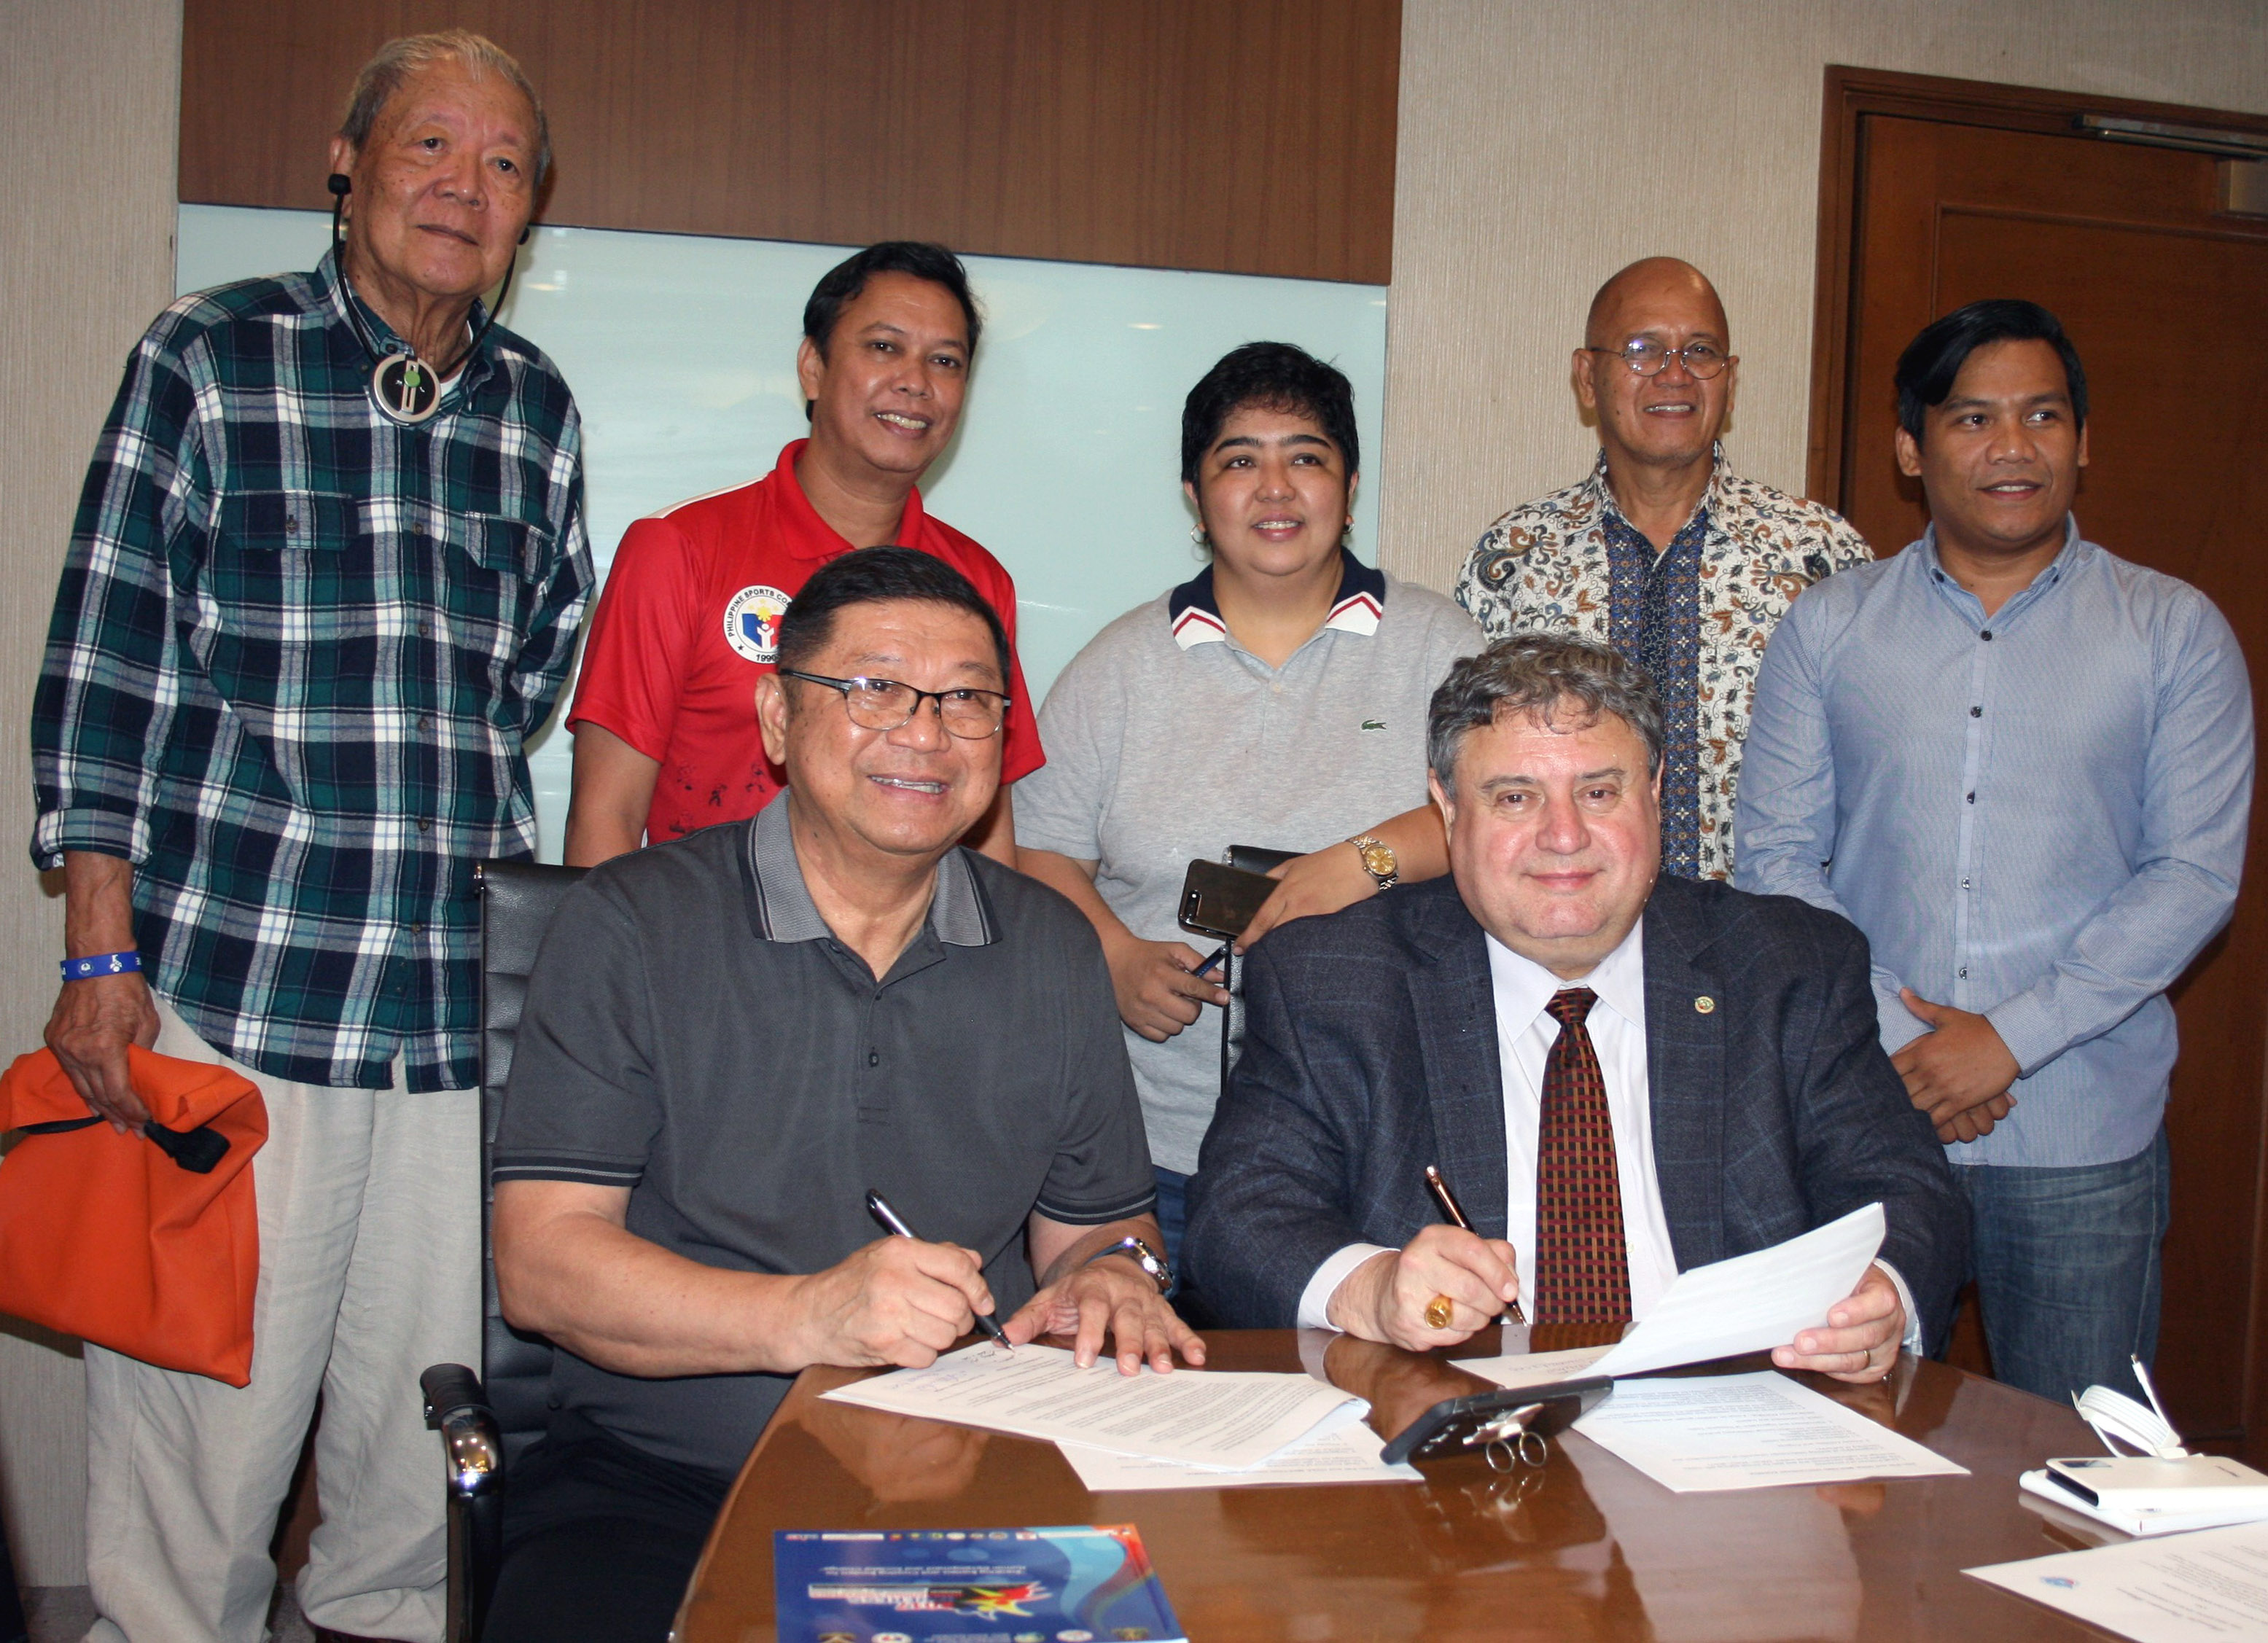 United States Sports Academy Signs Agreement to Build Philippine National Sports Program